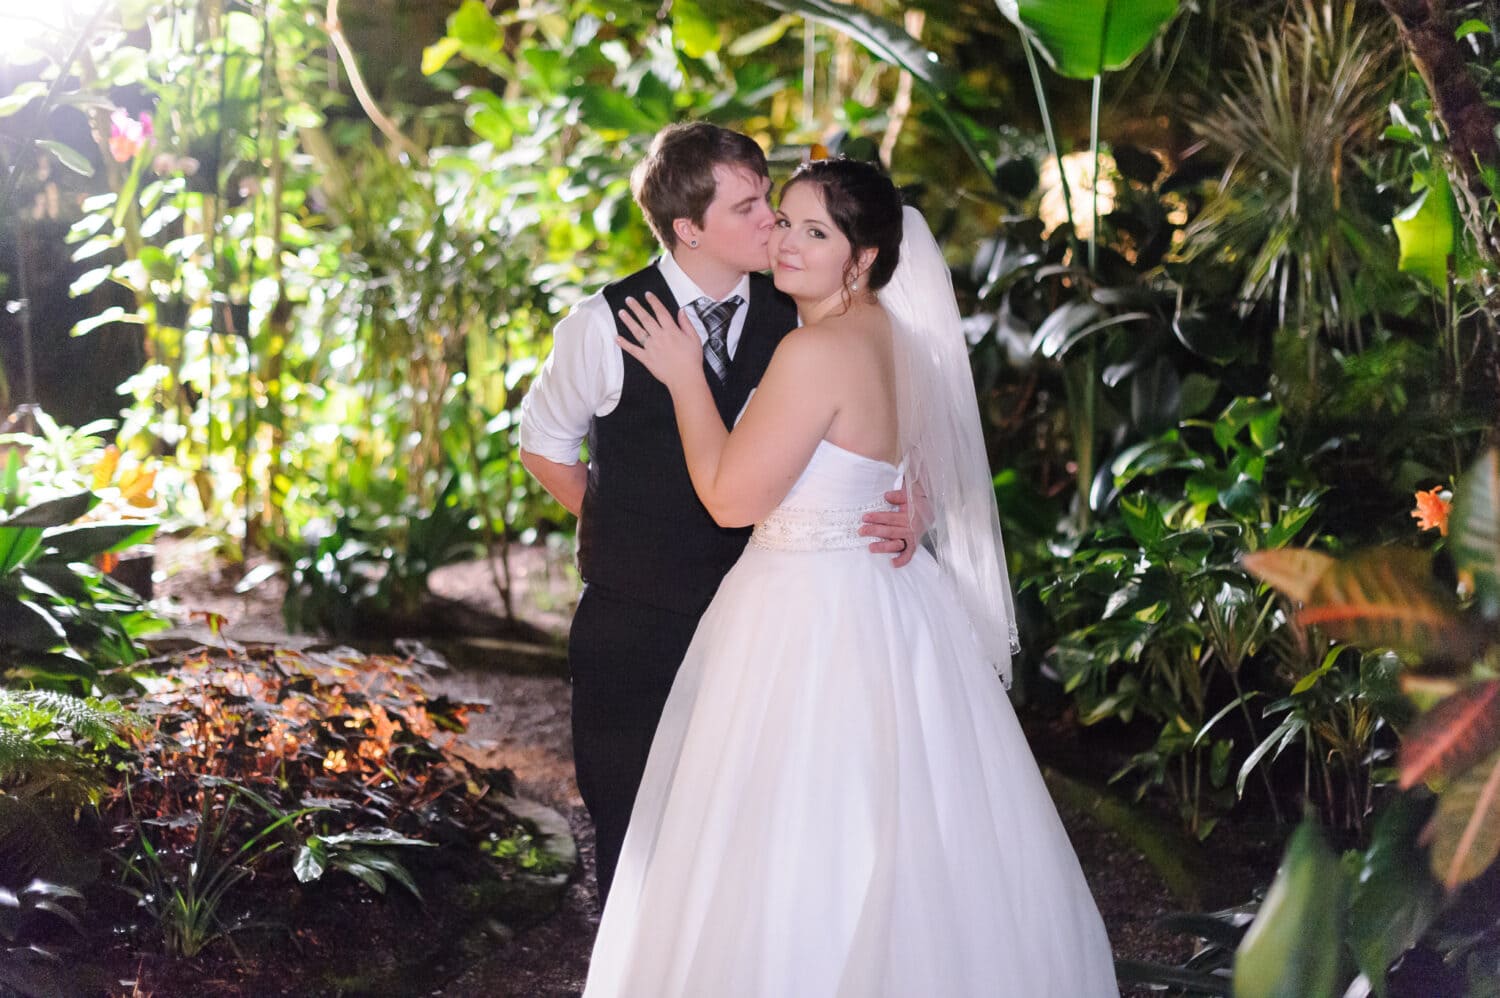 Kiss in the conservatory - Magnolia Plantation